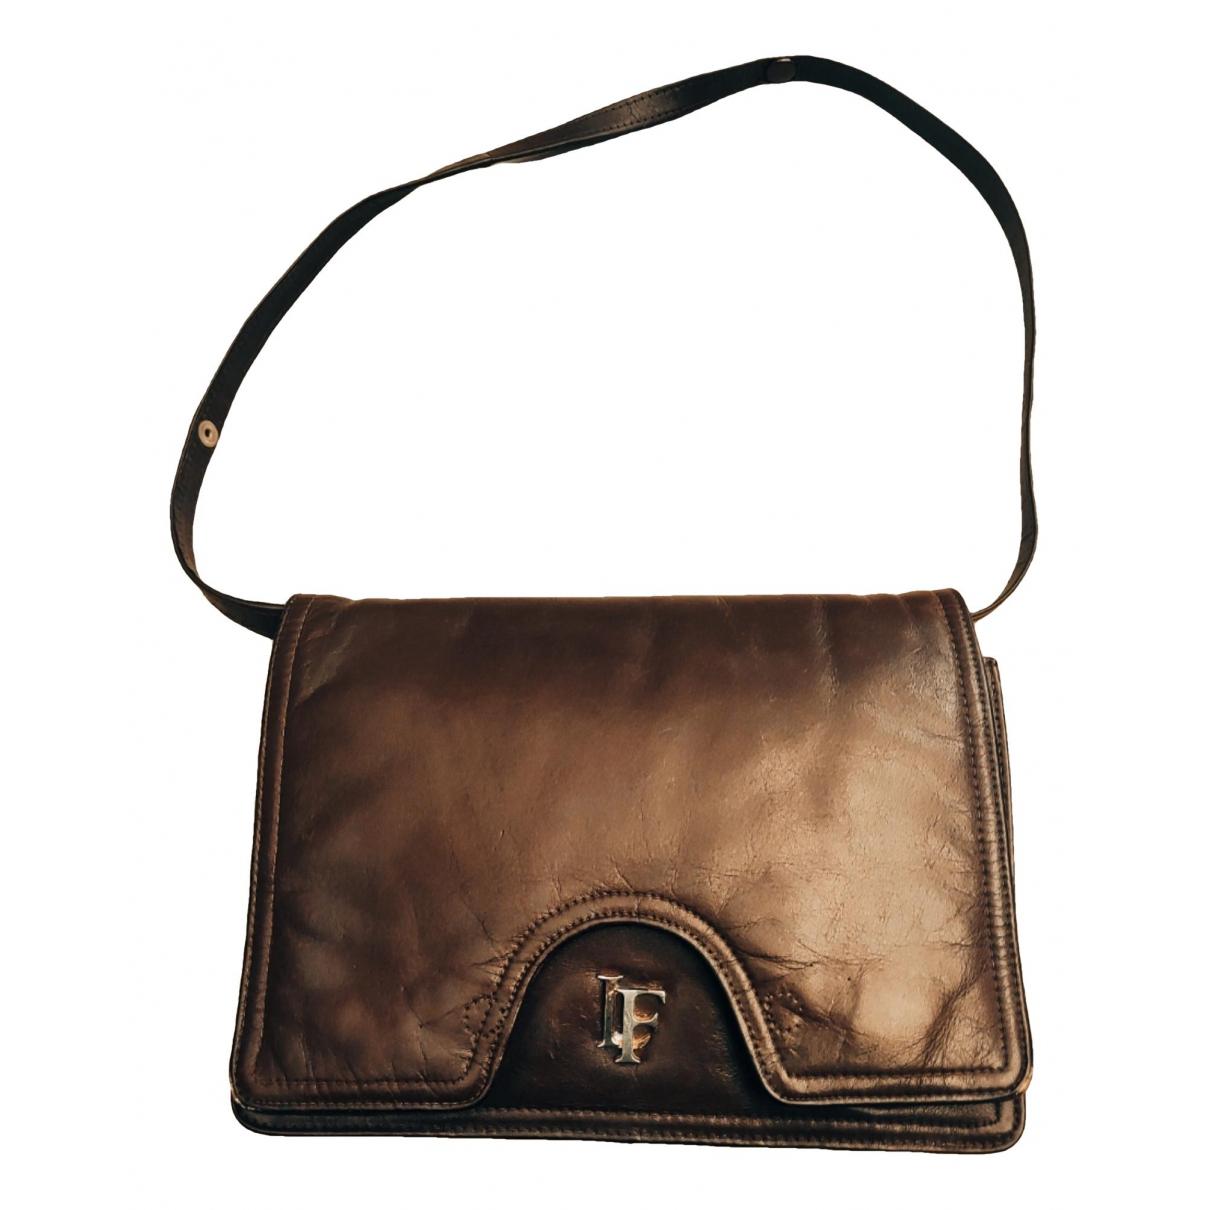 Six Vintage Handbags, To Include Two Louis Feraud Bags.